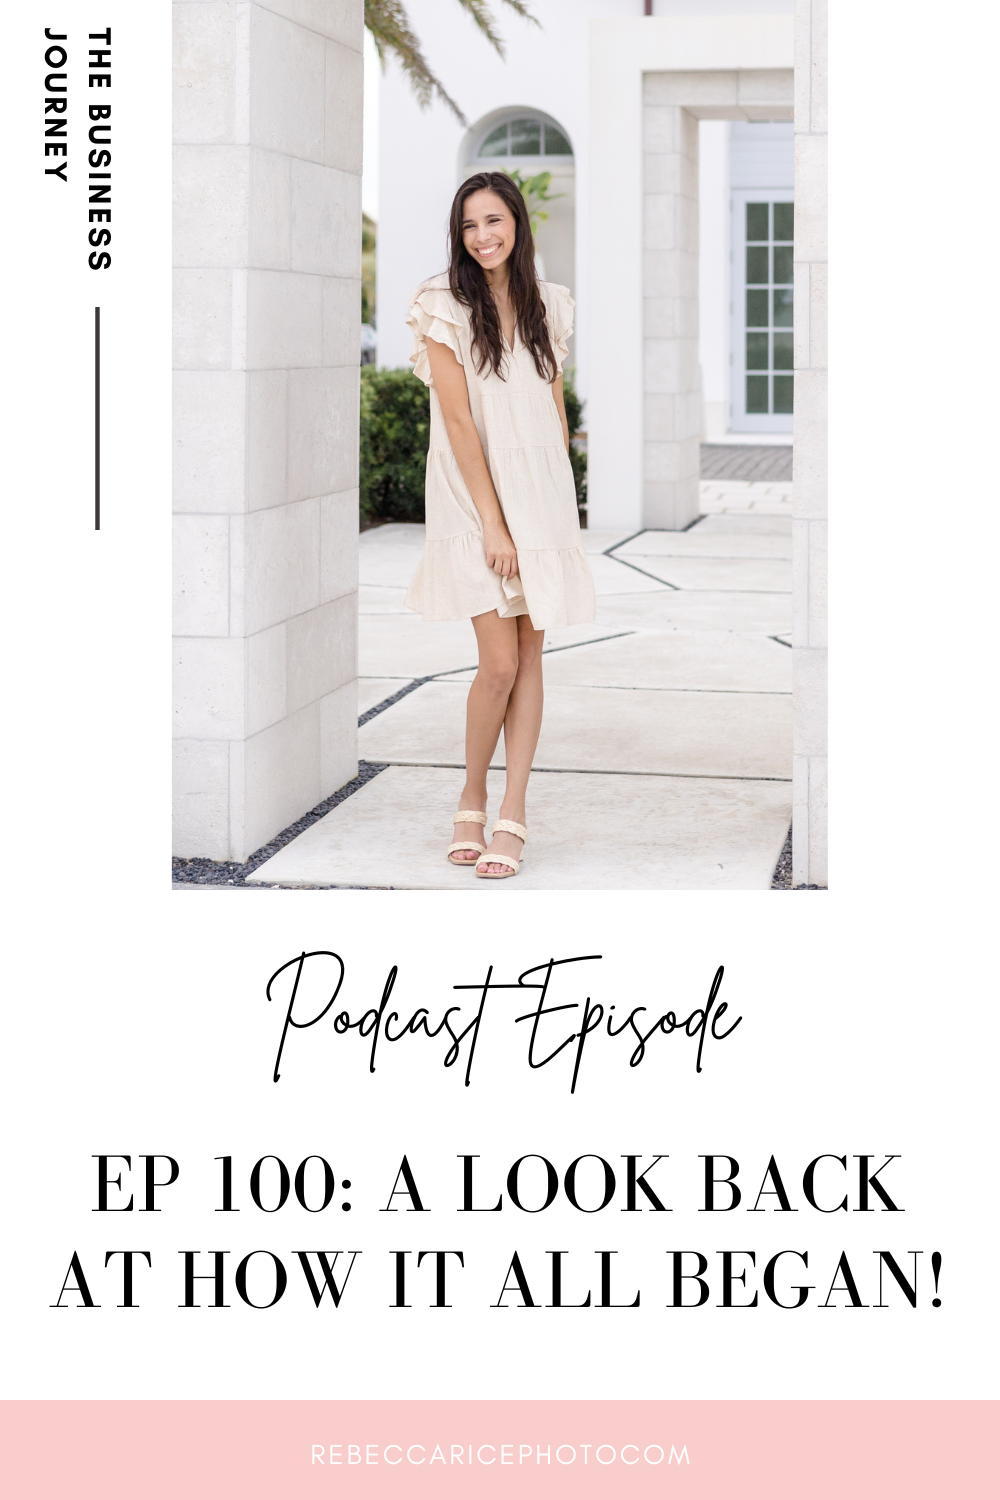 A look back at how it all began! 100th Podcast Episode! Rebecca Rice Photo